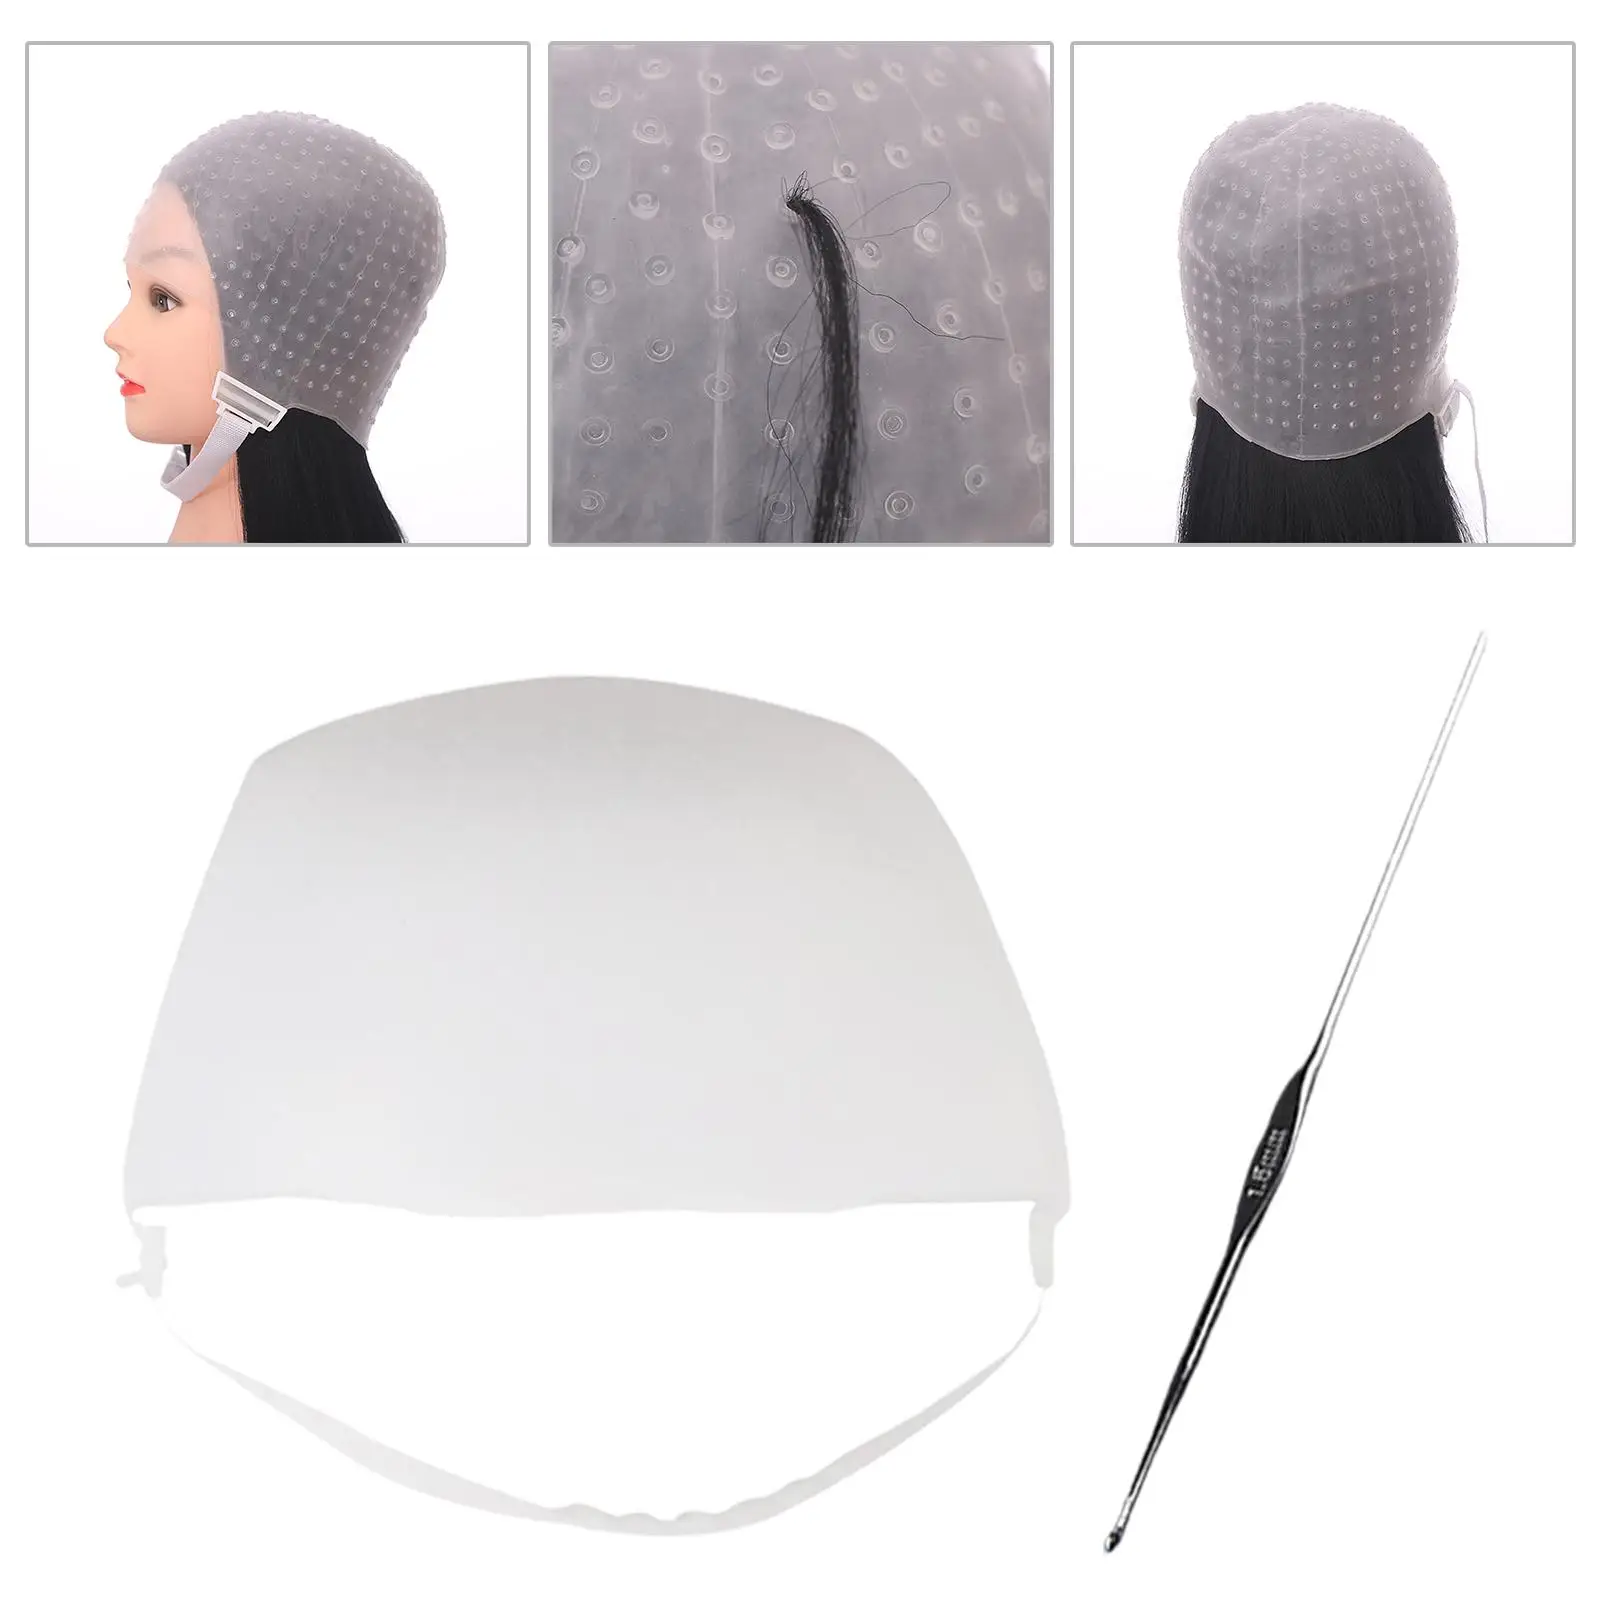 Silicone Hair Highlighting Hat Professional Pre Punched Binding Band White Hair Dye Hat for Barber Hair Styling Hair Salon Women